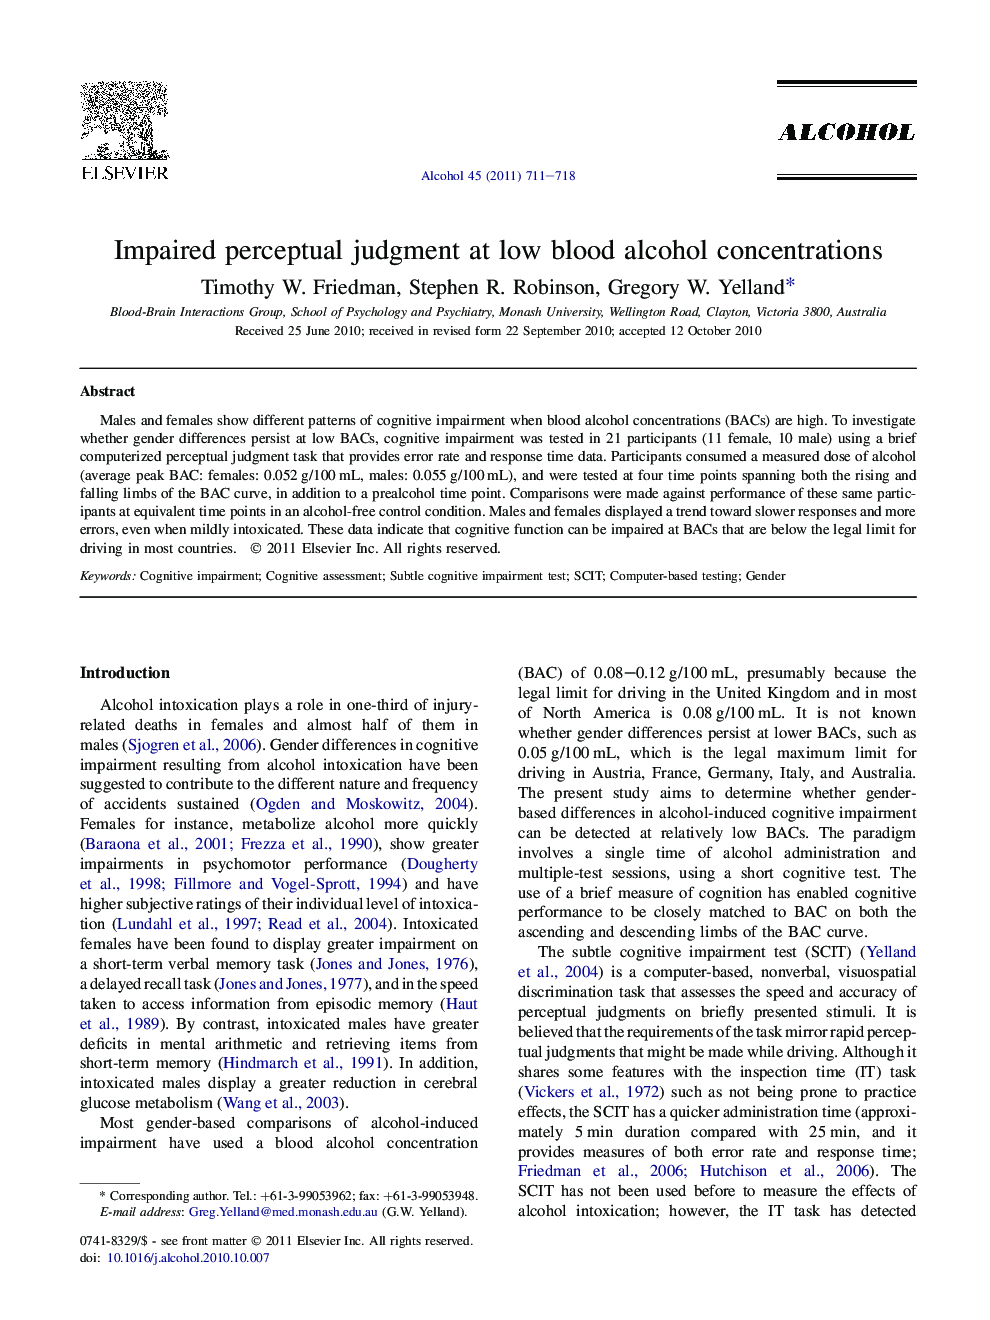 Impaired perceptual judgment at low blood alcohol concentrations